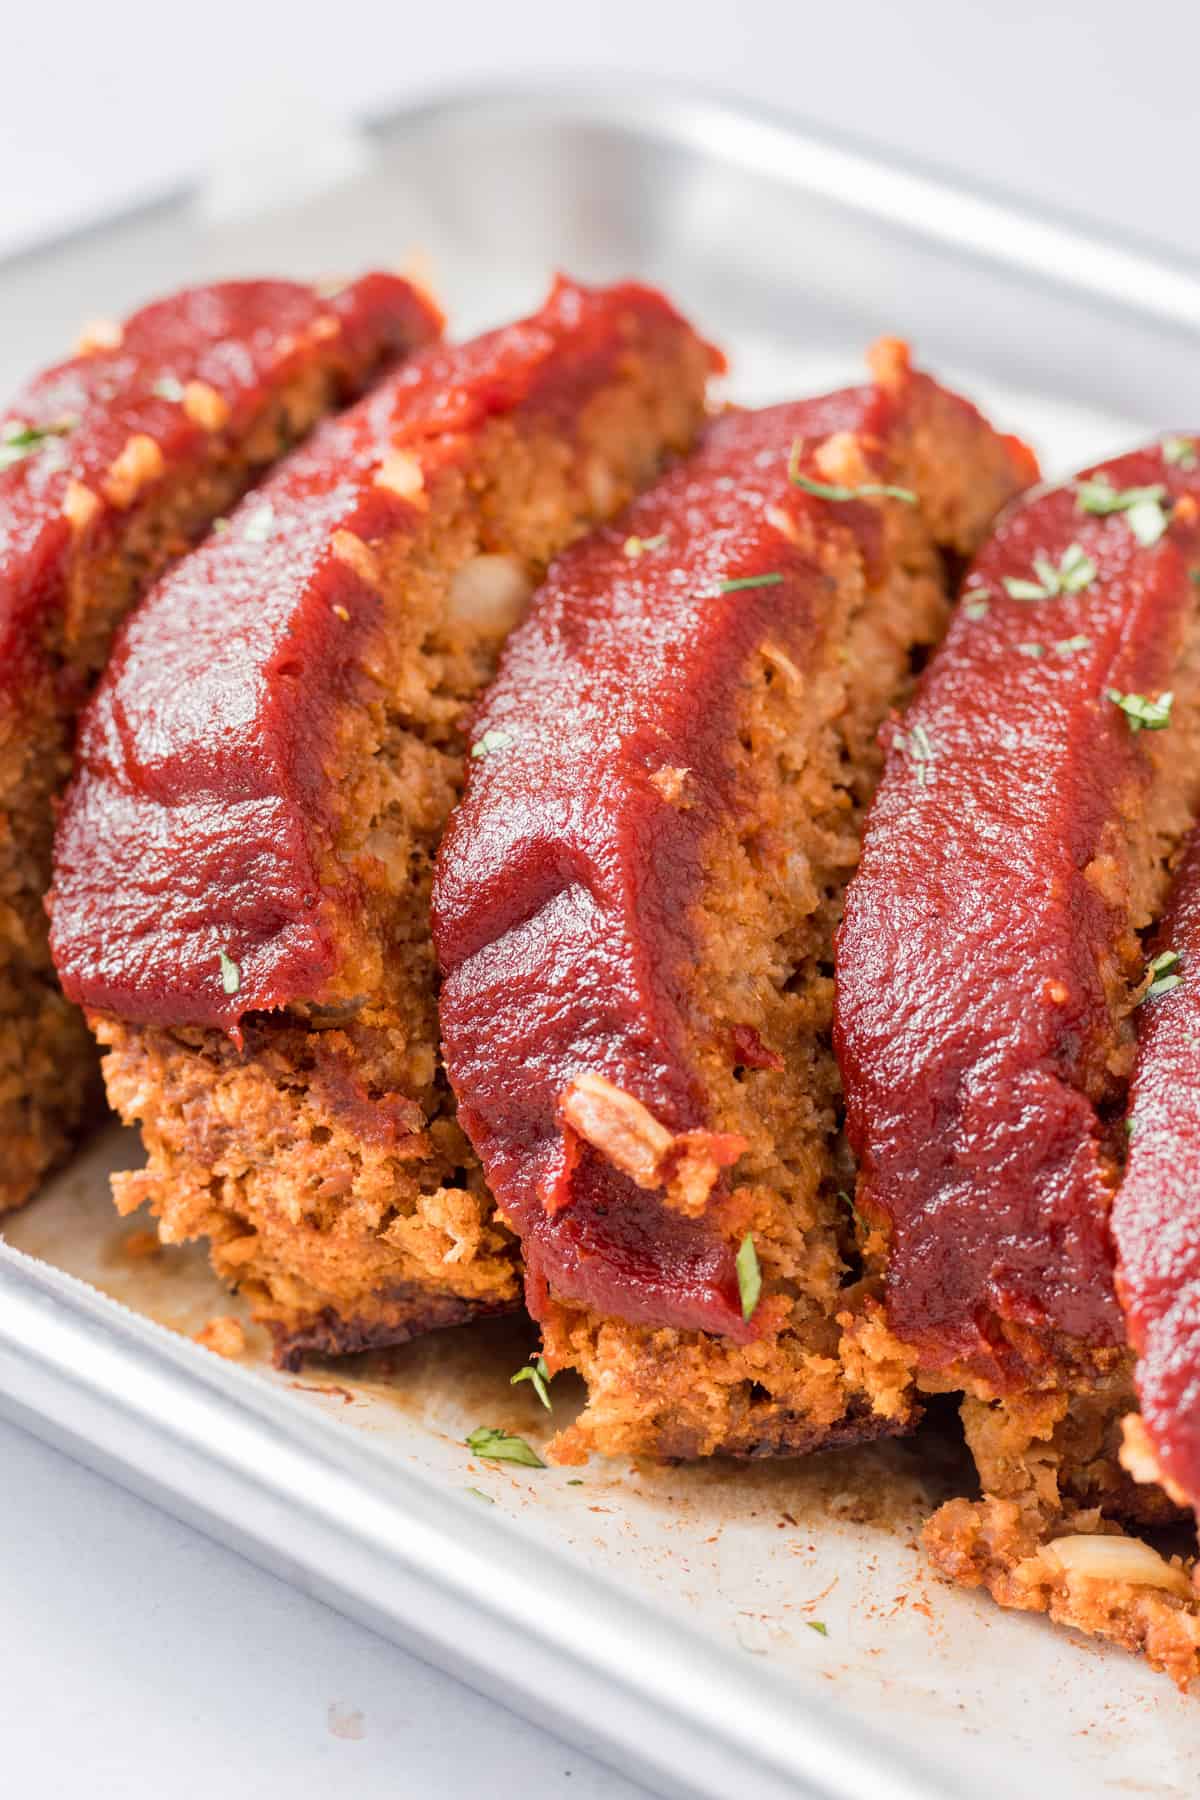 Closeup of meatloaf on baking tray.